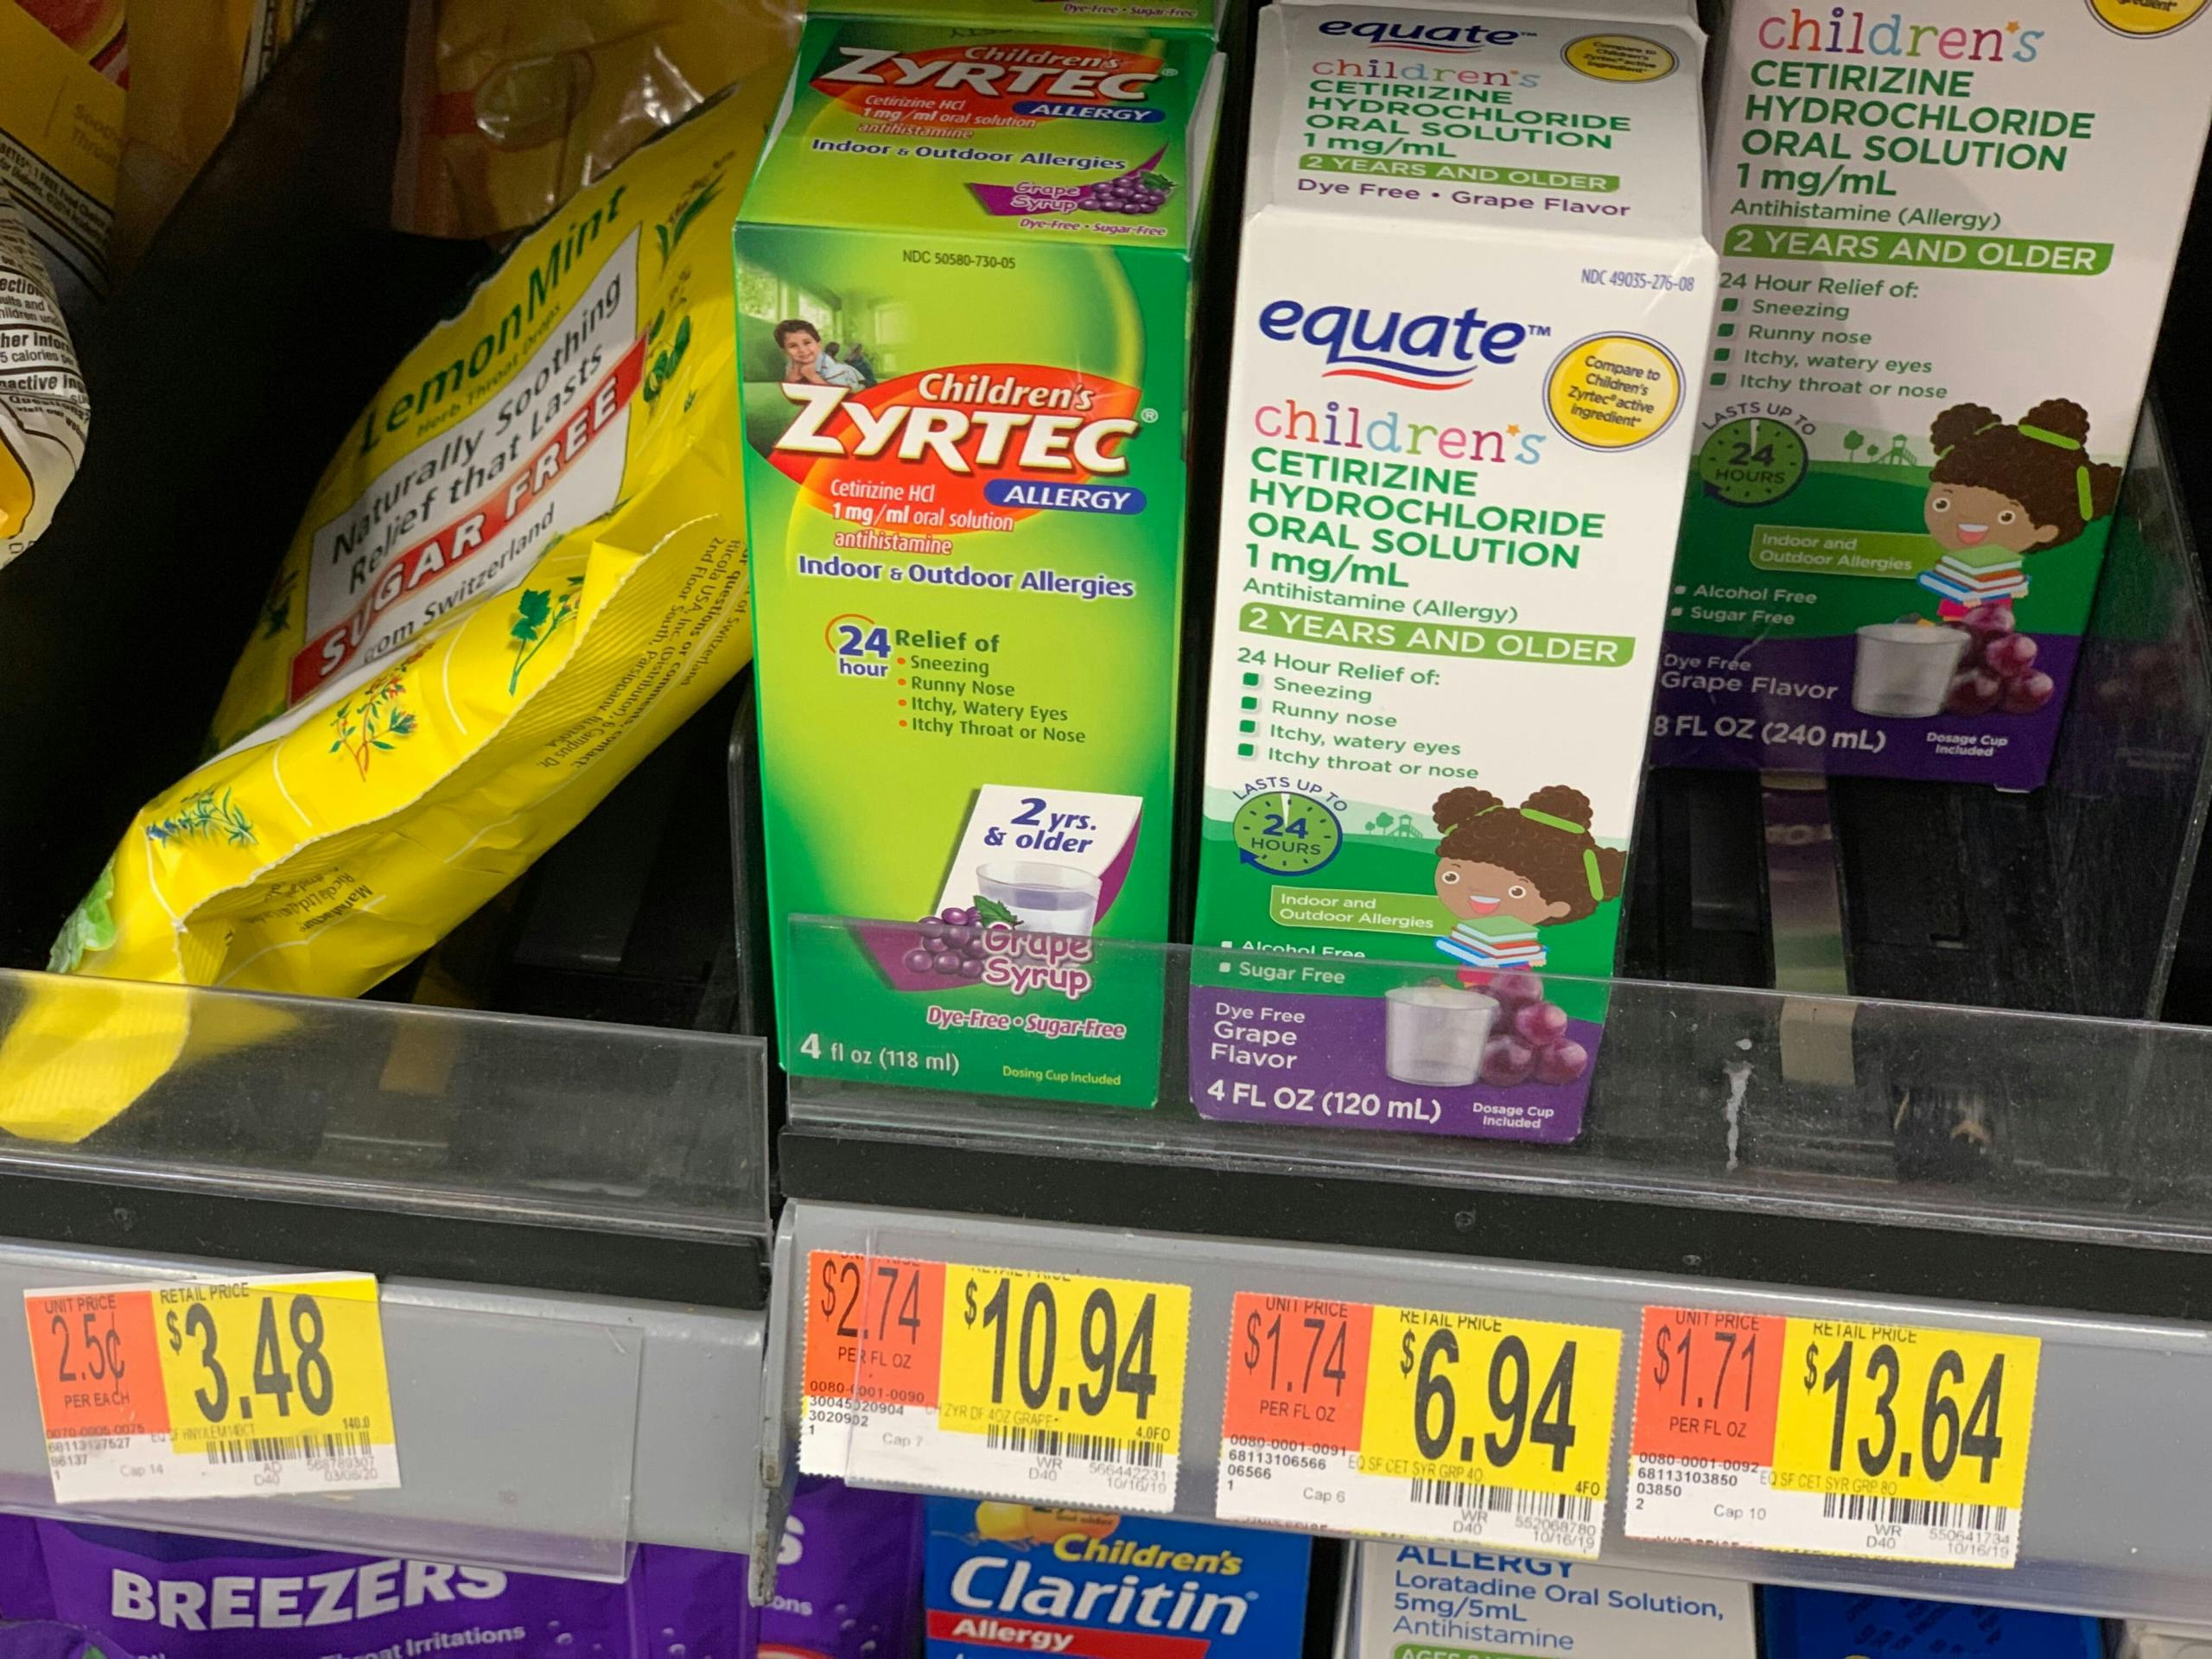 Kids' Zyrtec Allergy Relief, Only 6.94 in Store at Walmart The Krazy